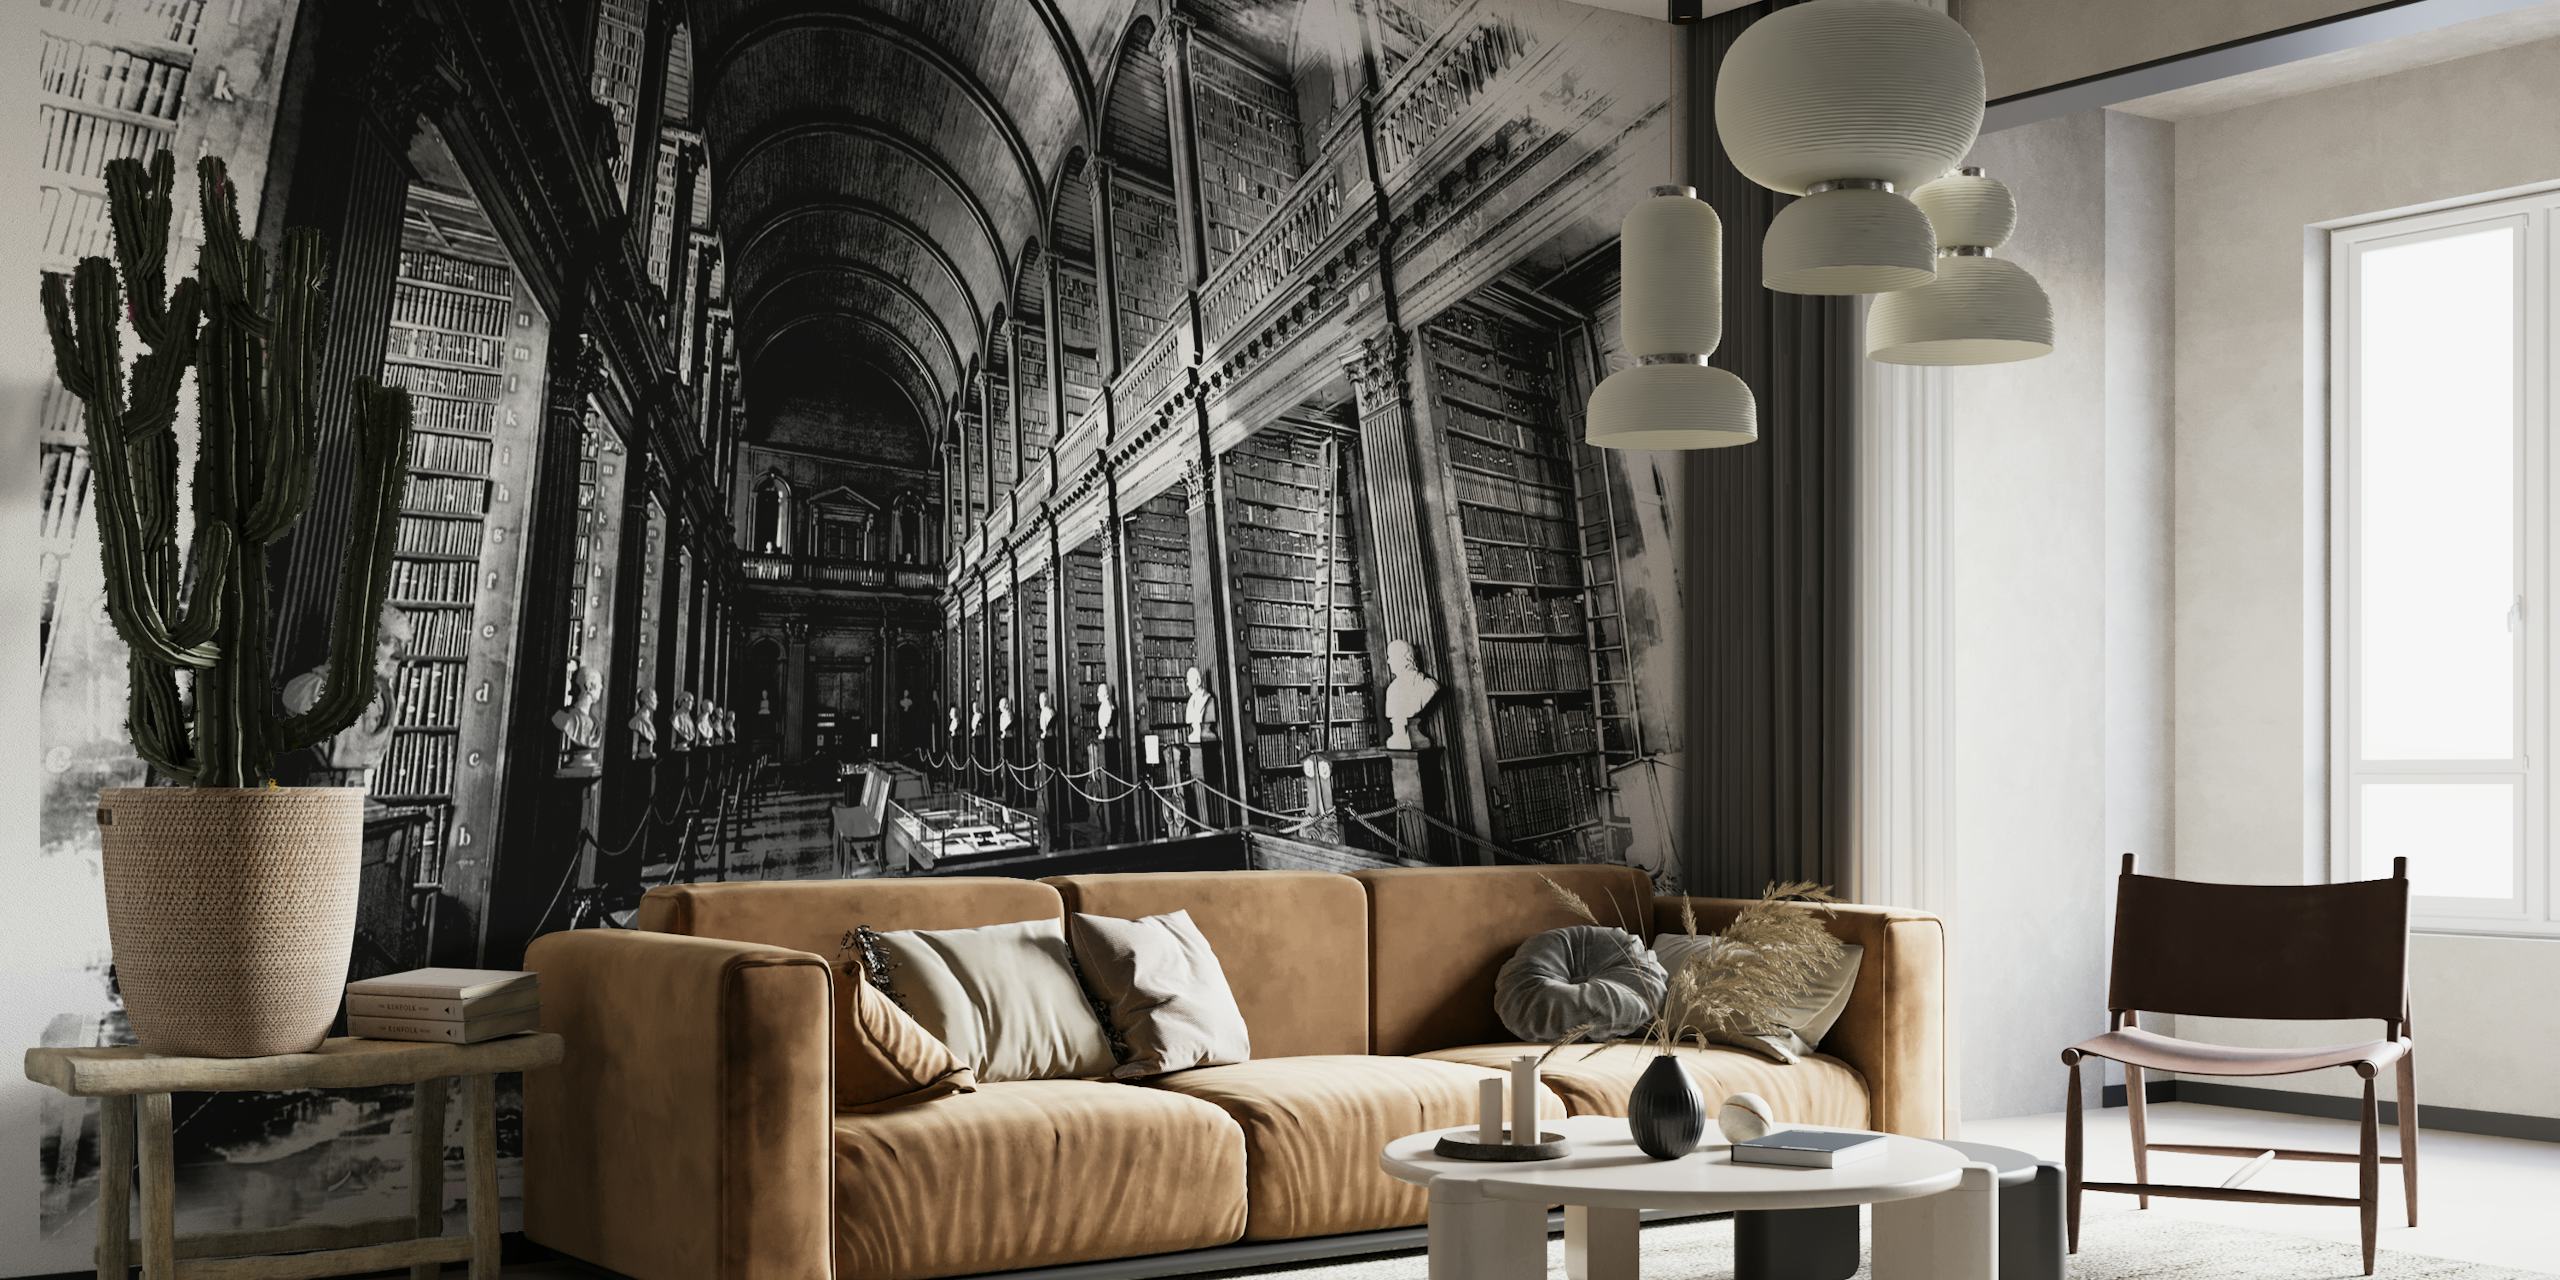 Sketch-style library wall mural with rows of books